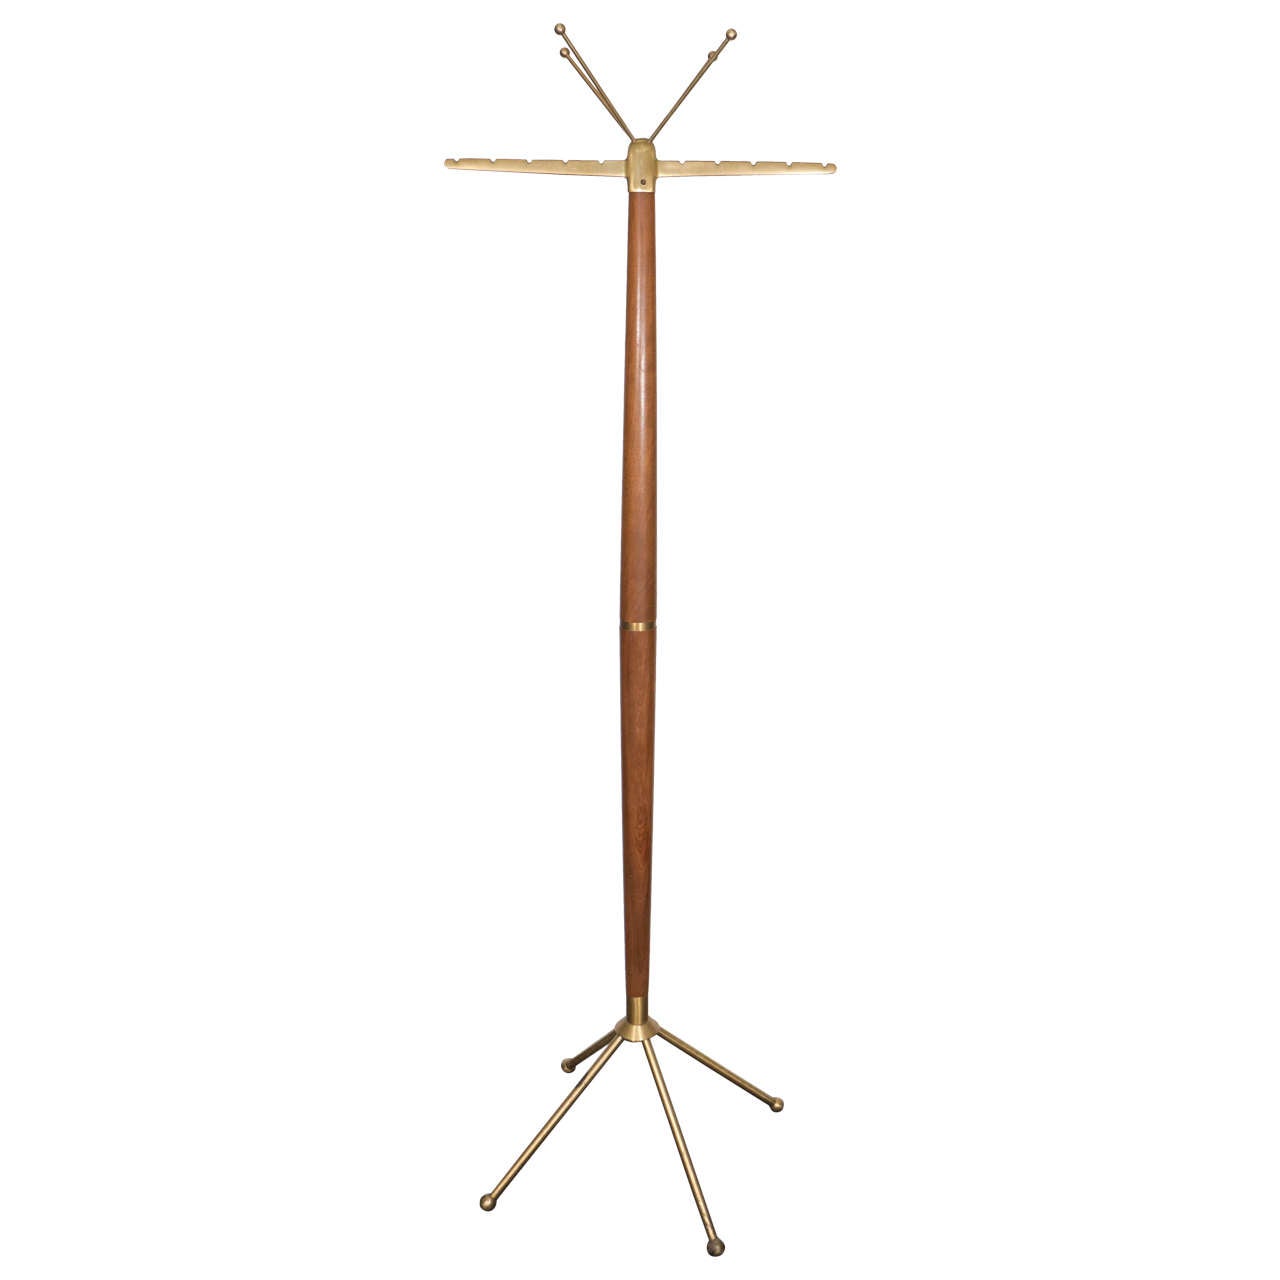 A Midcentury Tapered Wood Coat Stand in the Style of Gio Ponti